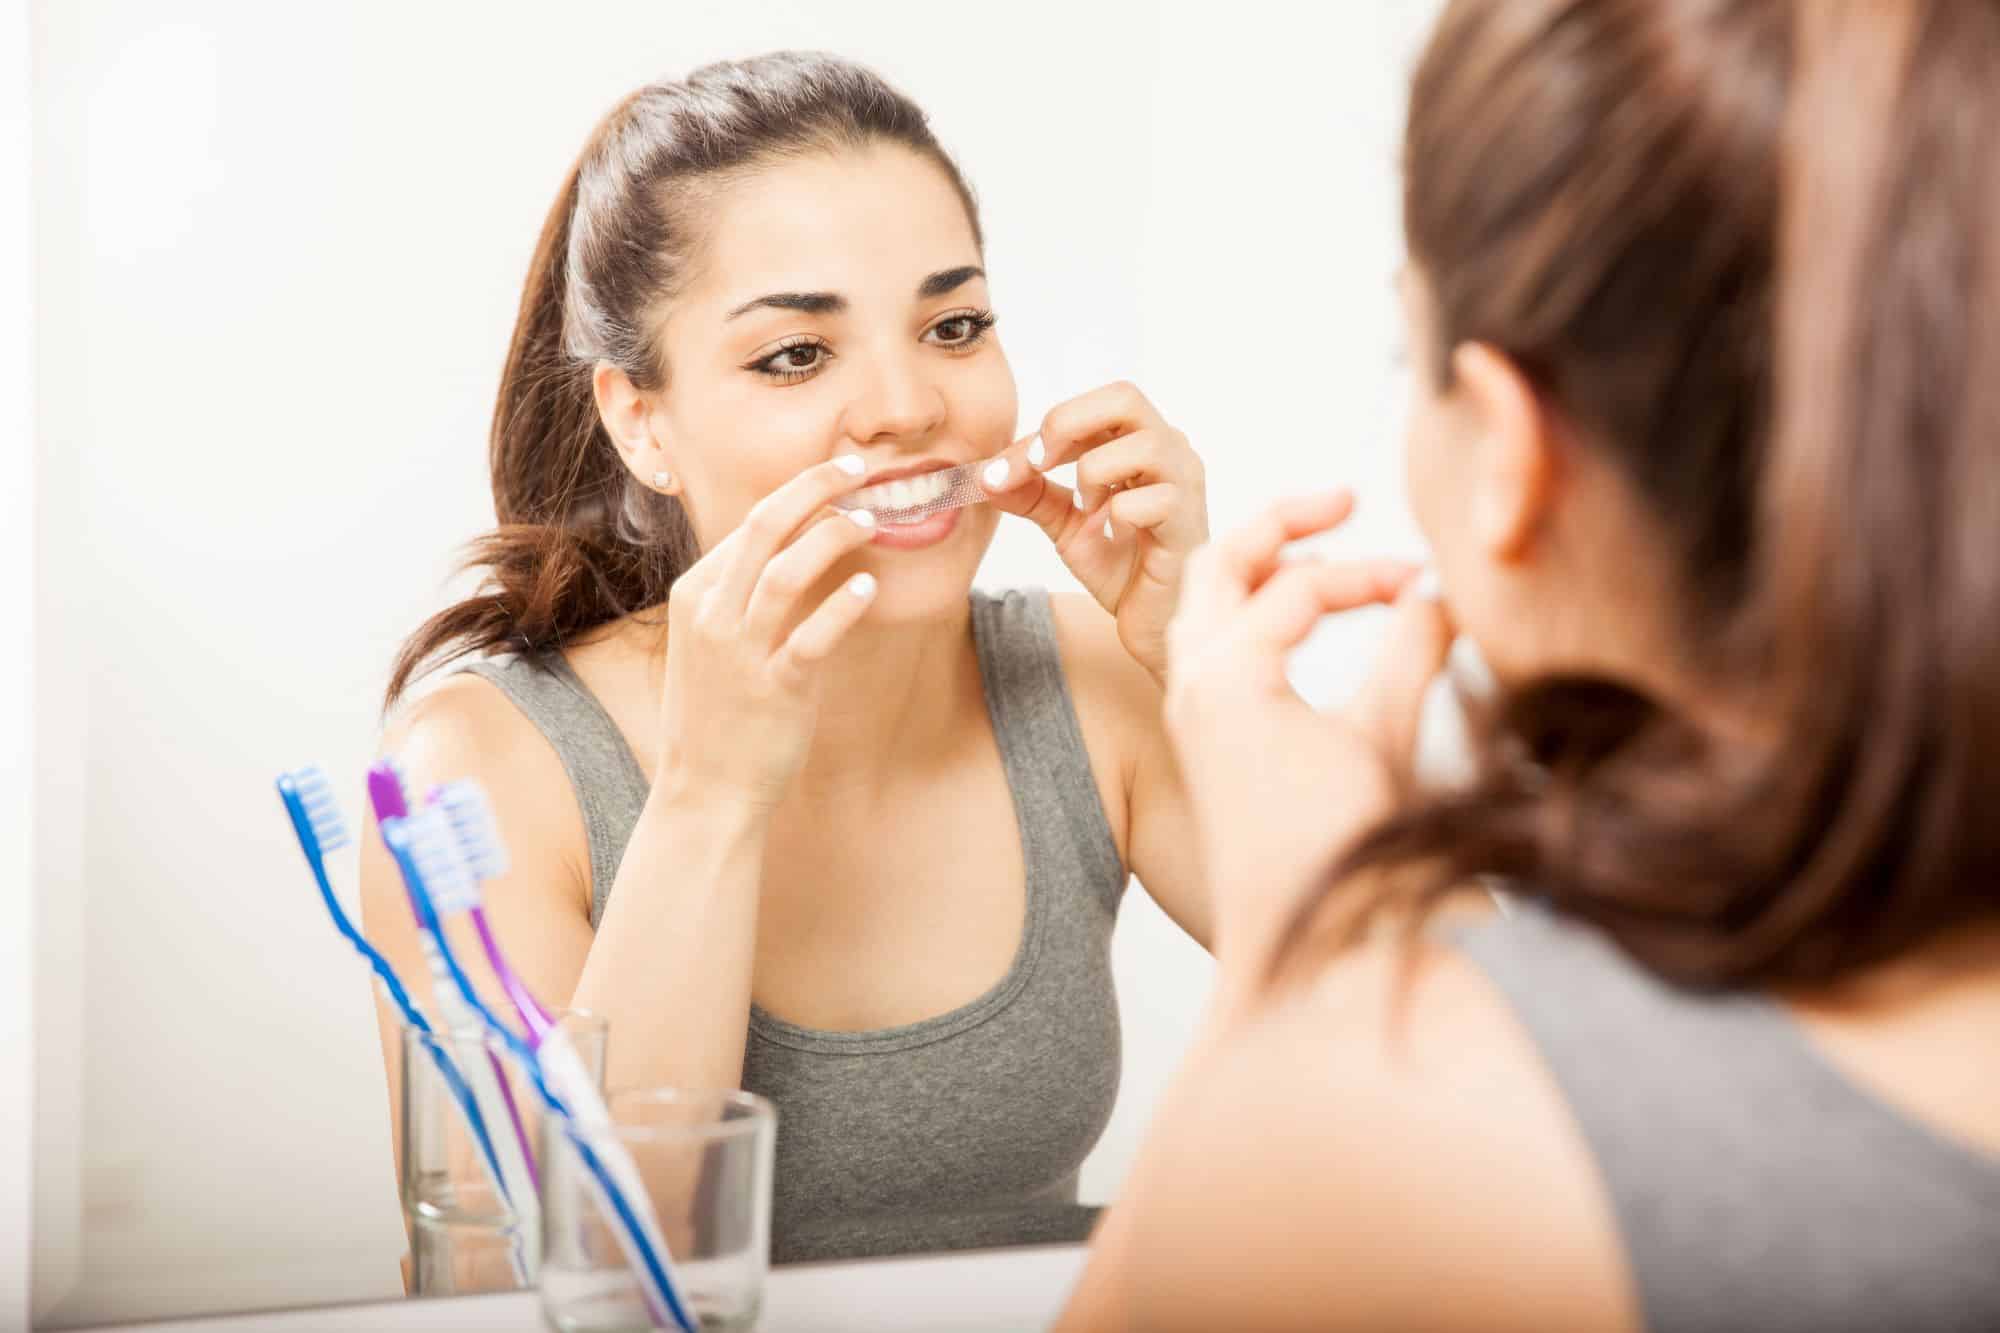 A young woman using a teeth whitening strip (image by AntonioDiaz, Adobe Stock)